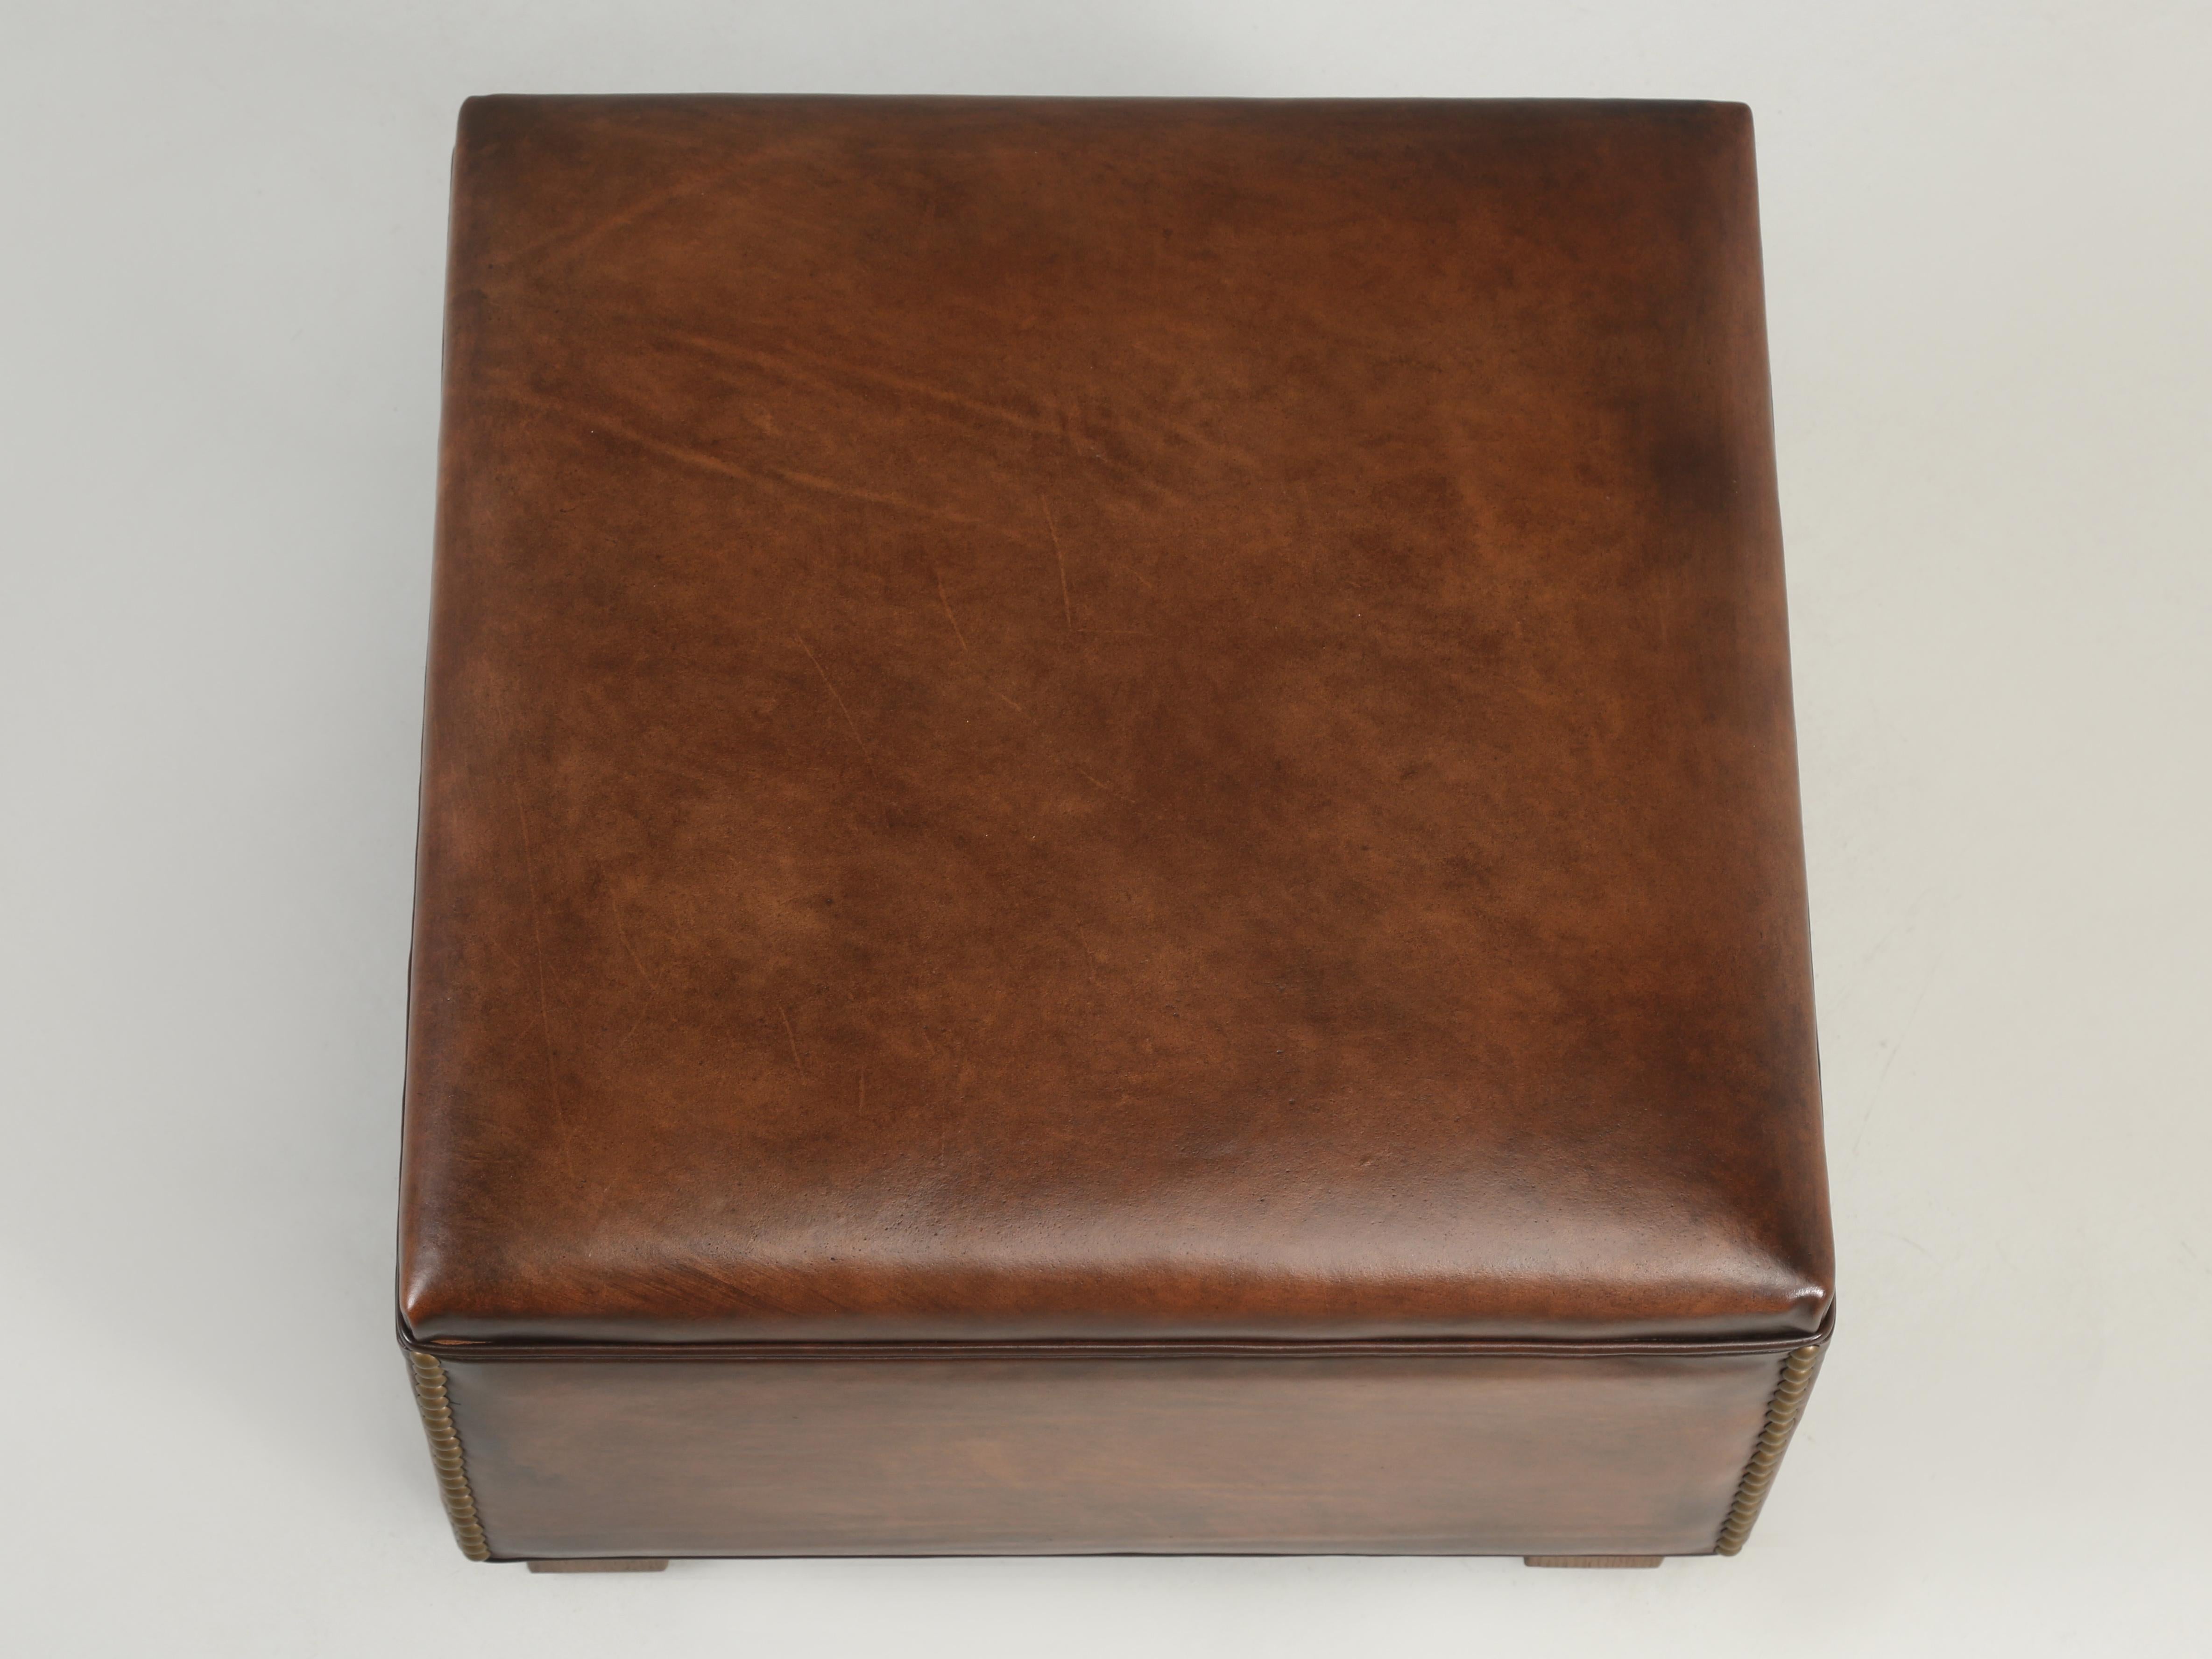 French leather club chair ottoman or foot stool. In our quest for purchasing French leather club chairs, we would occasionally come across their matching leather ottomans. Some will have a flat top like this ottoman and others more of a padded top